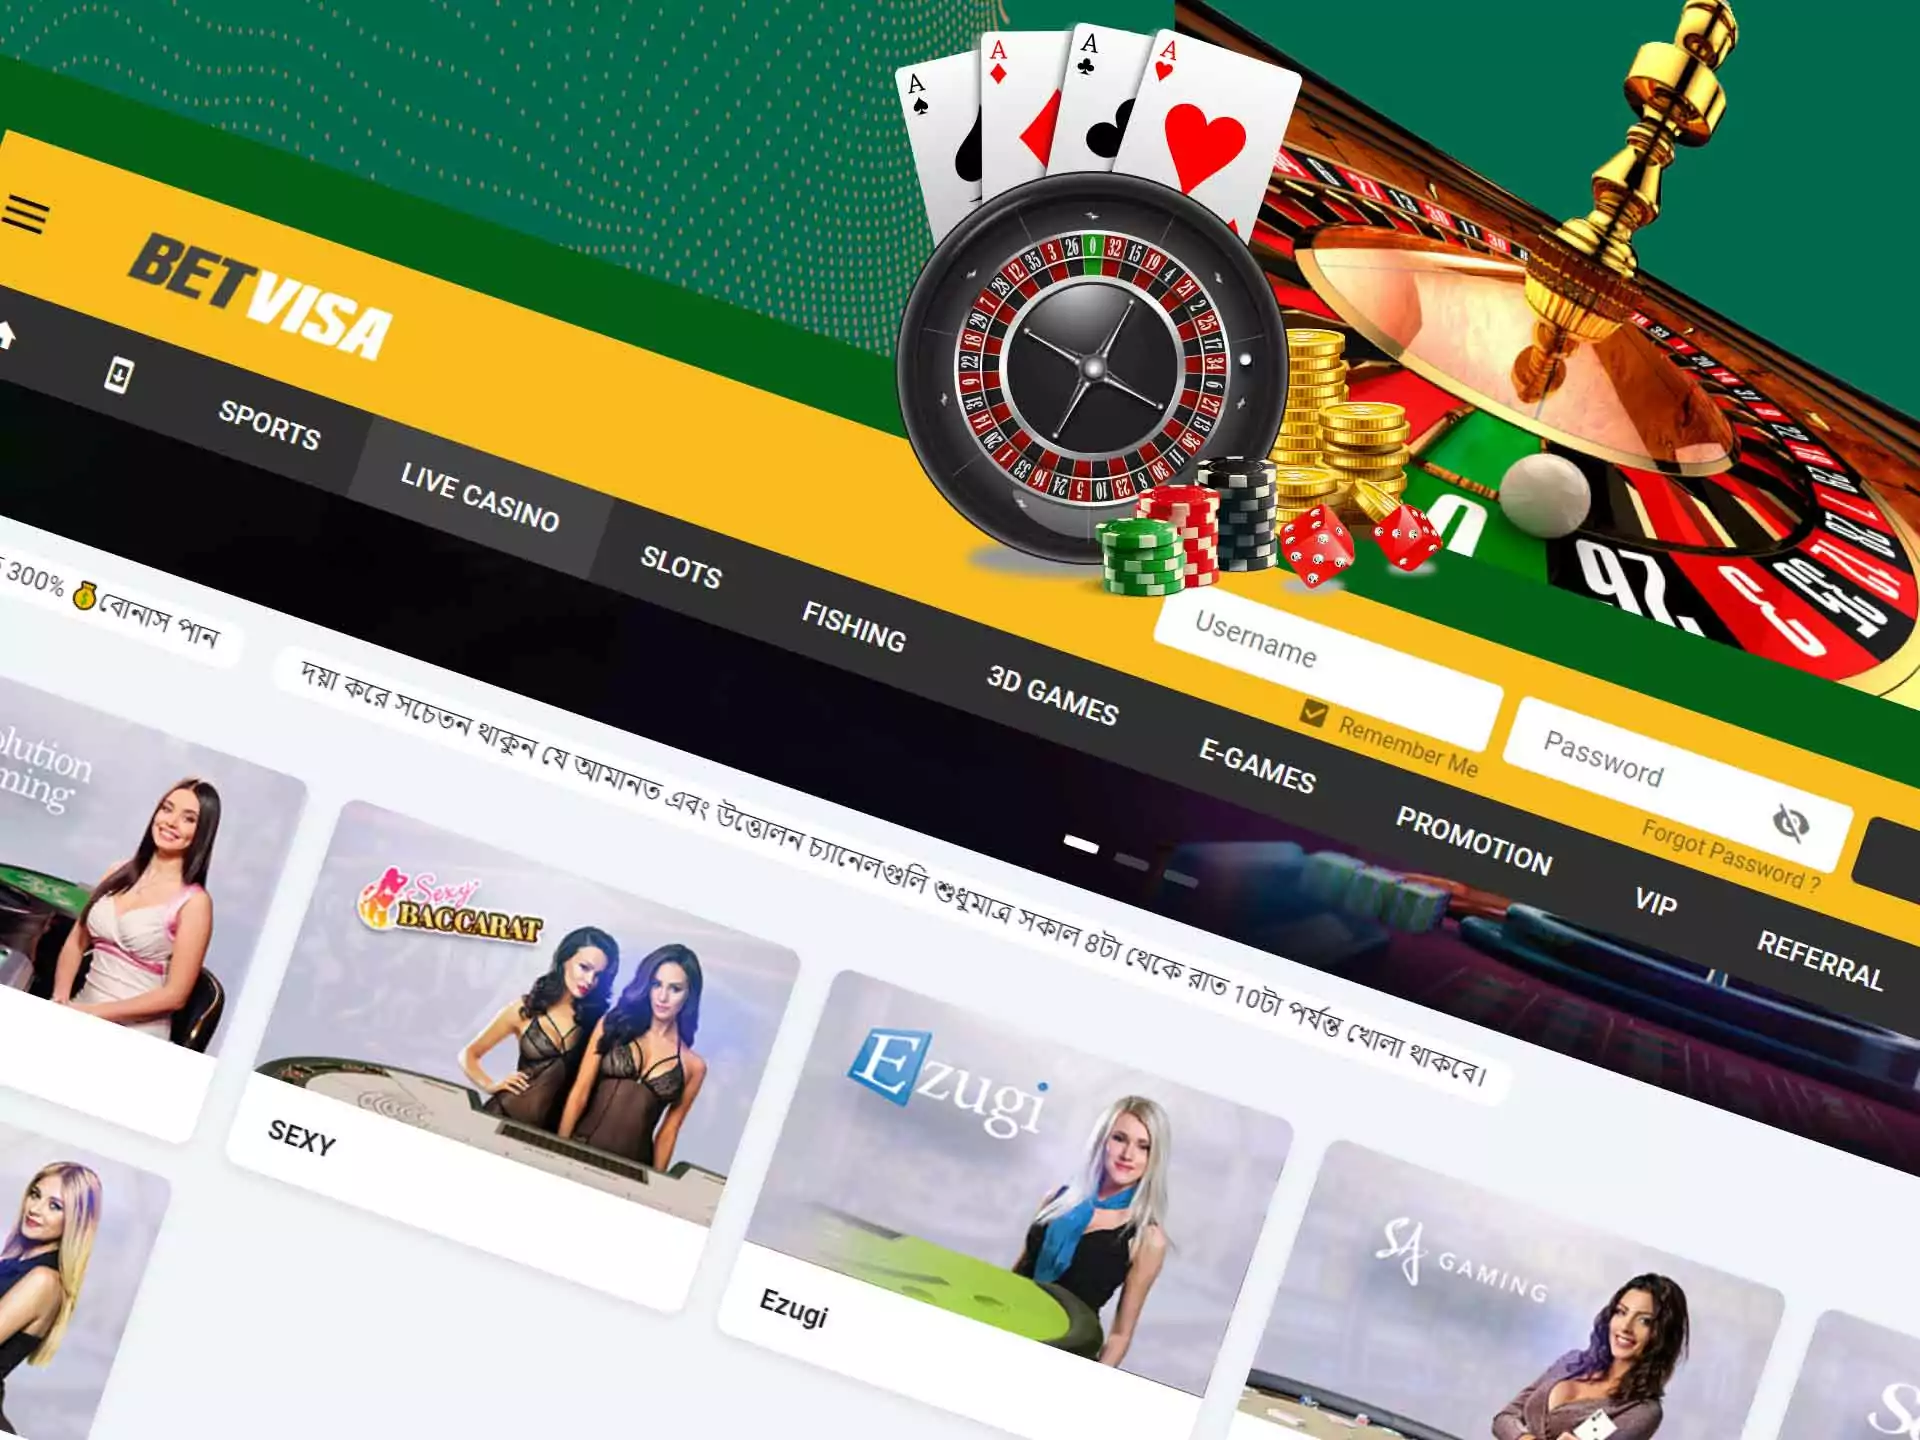 Play casino games against the real dealers and try to win them.